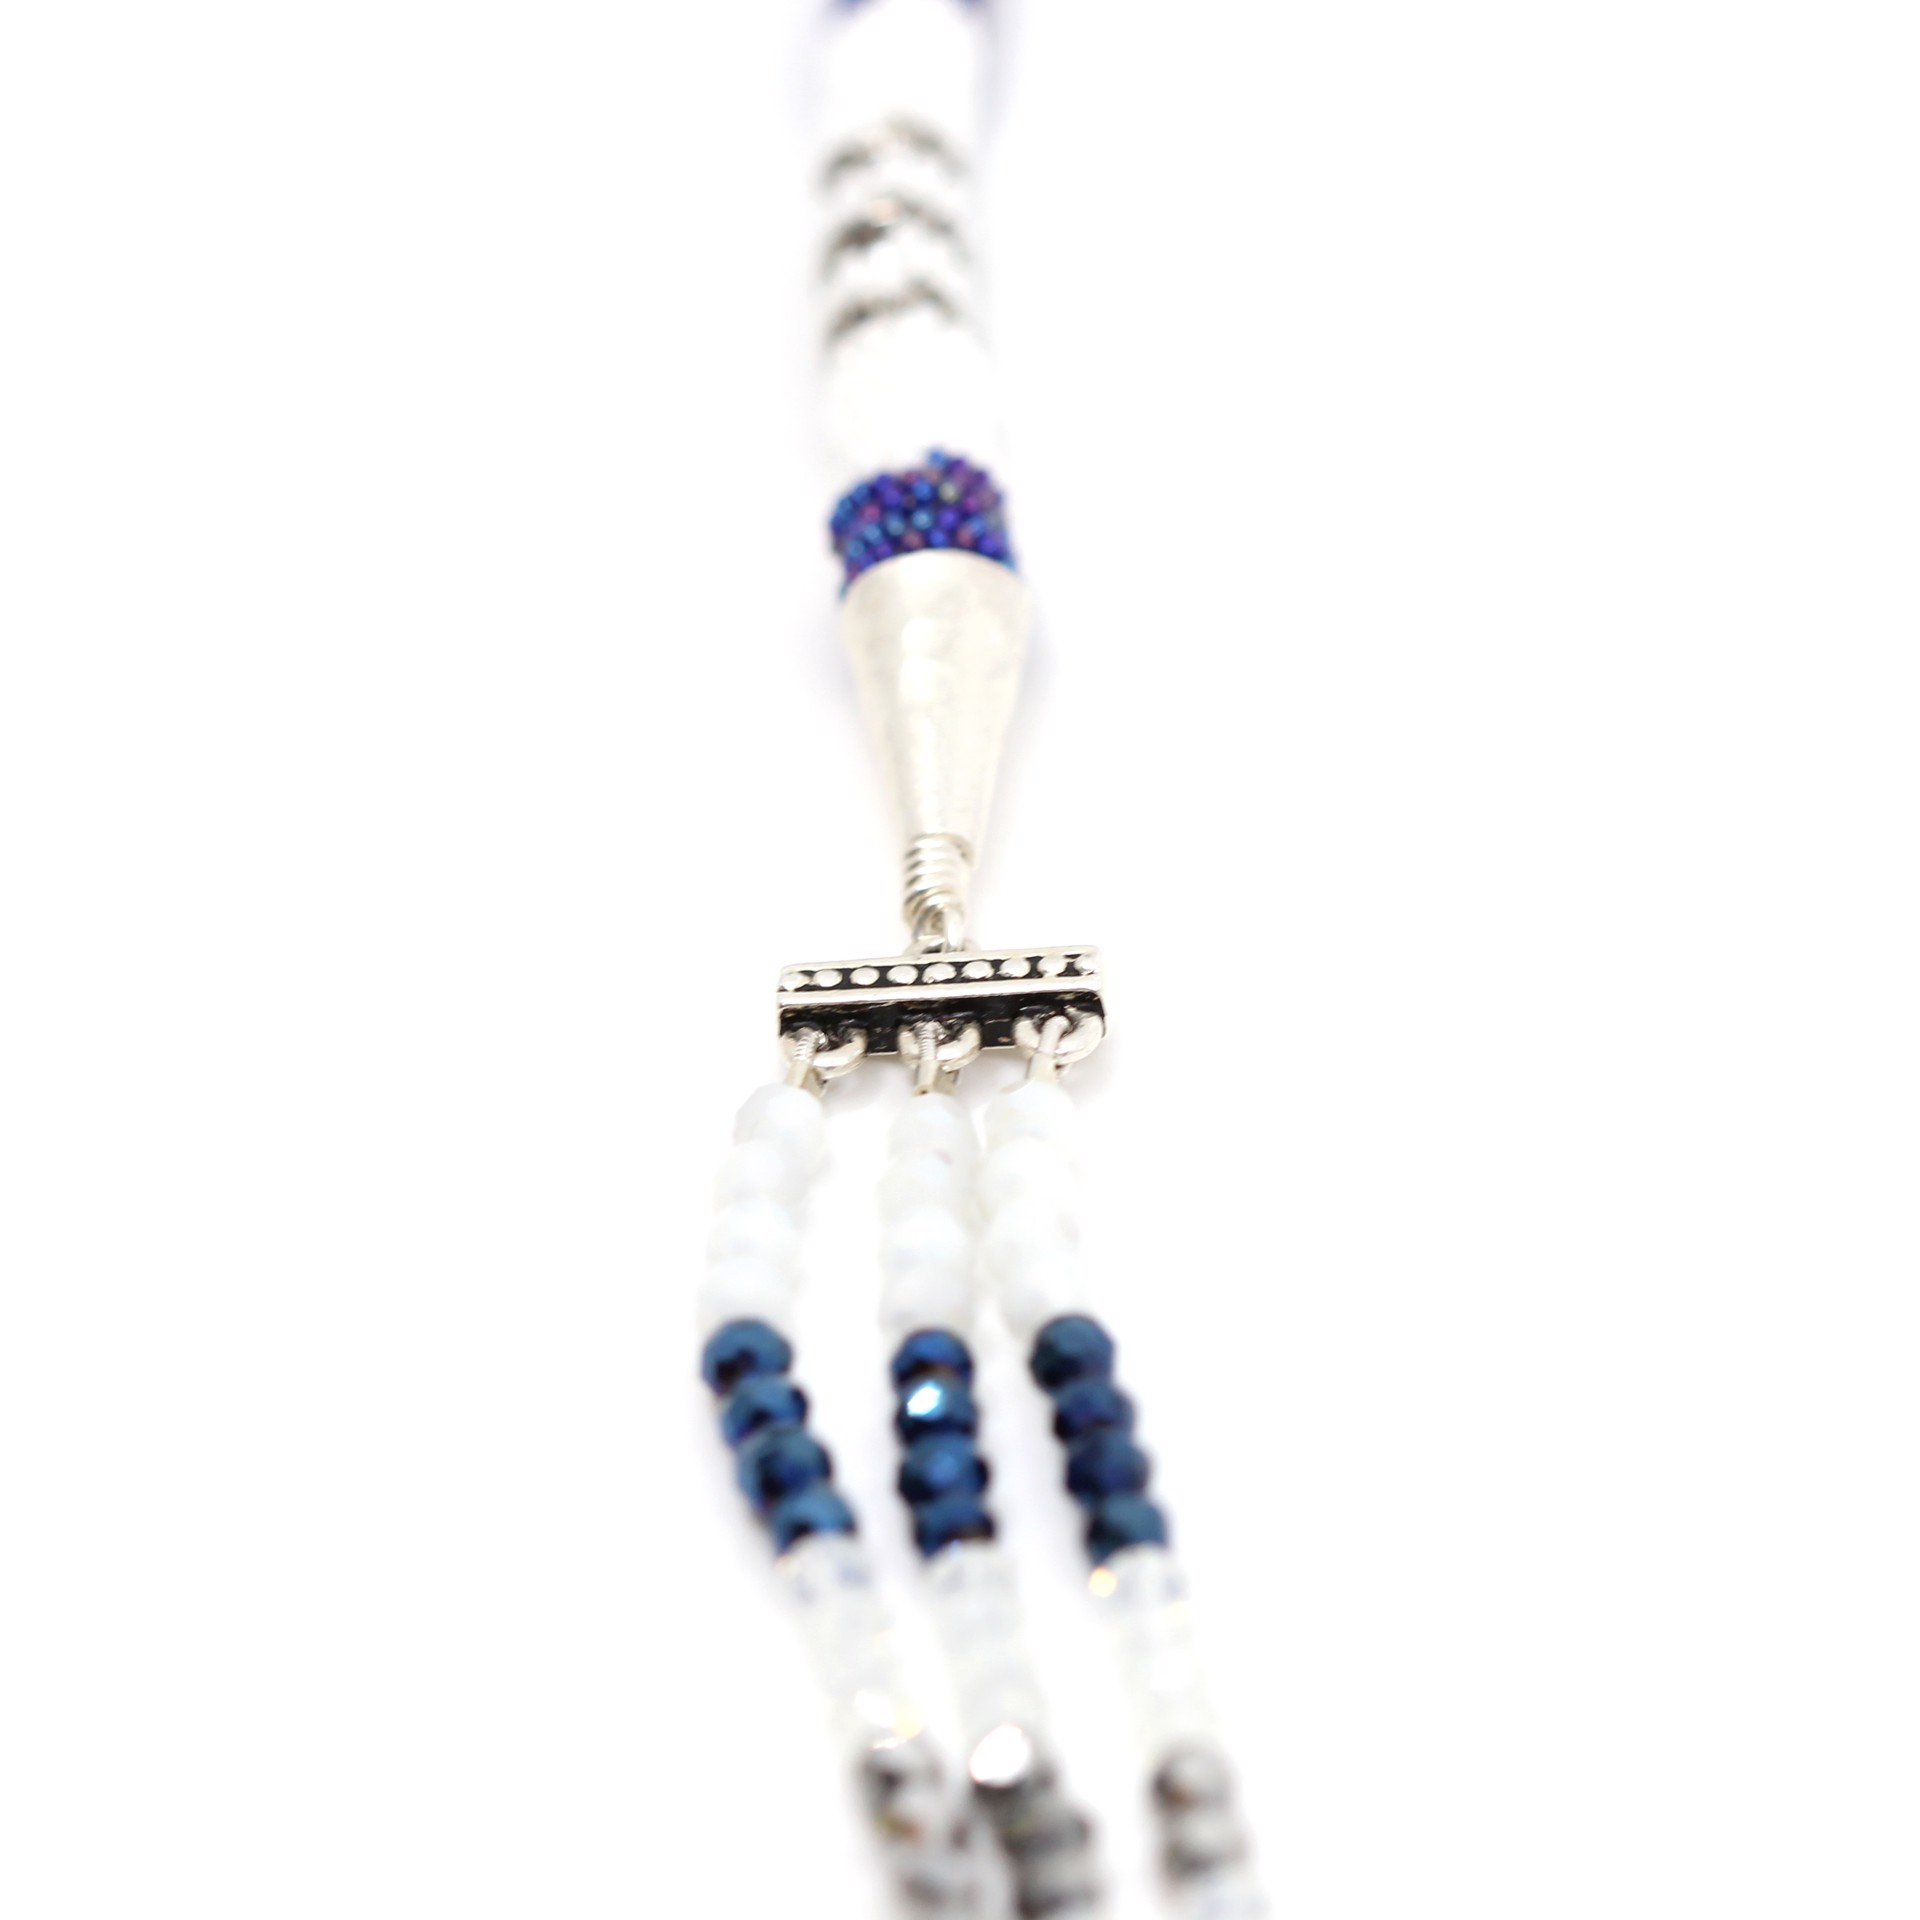 Blue & White Necklace by Hollis Chitto